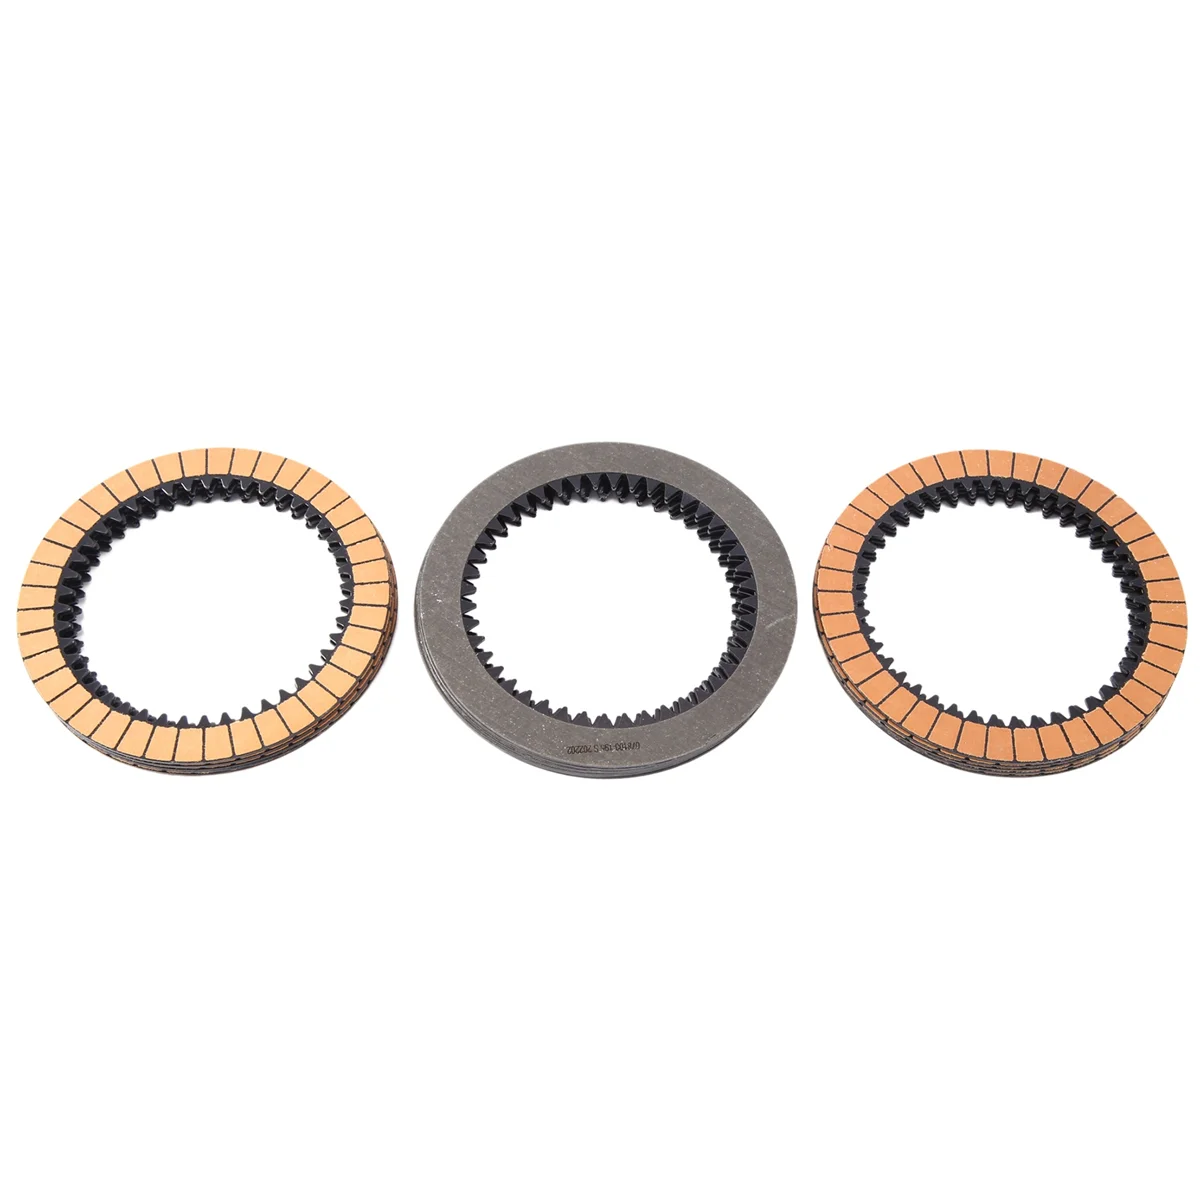 

New Transmission Friction Disk Rebuild Gearbox Clutch Friction Plate Kit for MAXA BAXA for Honda ACCORD 4CYL. 1998-2002